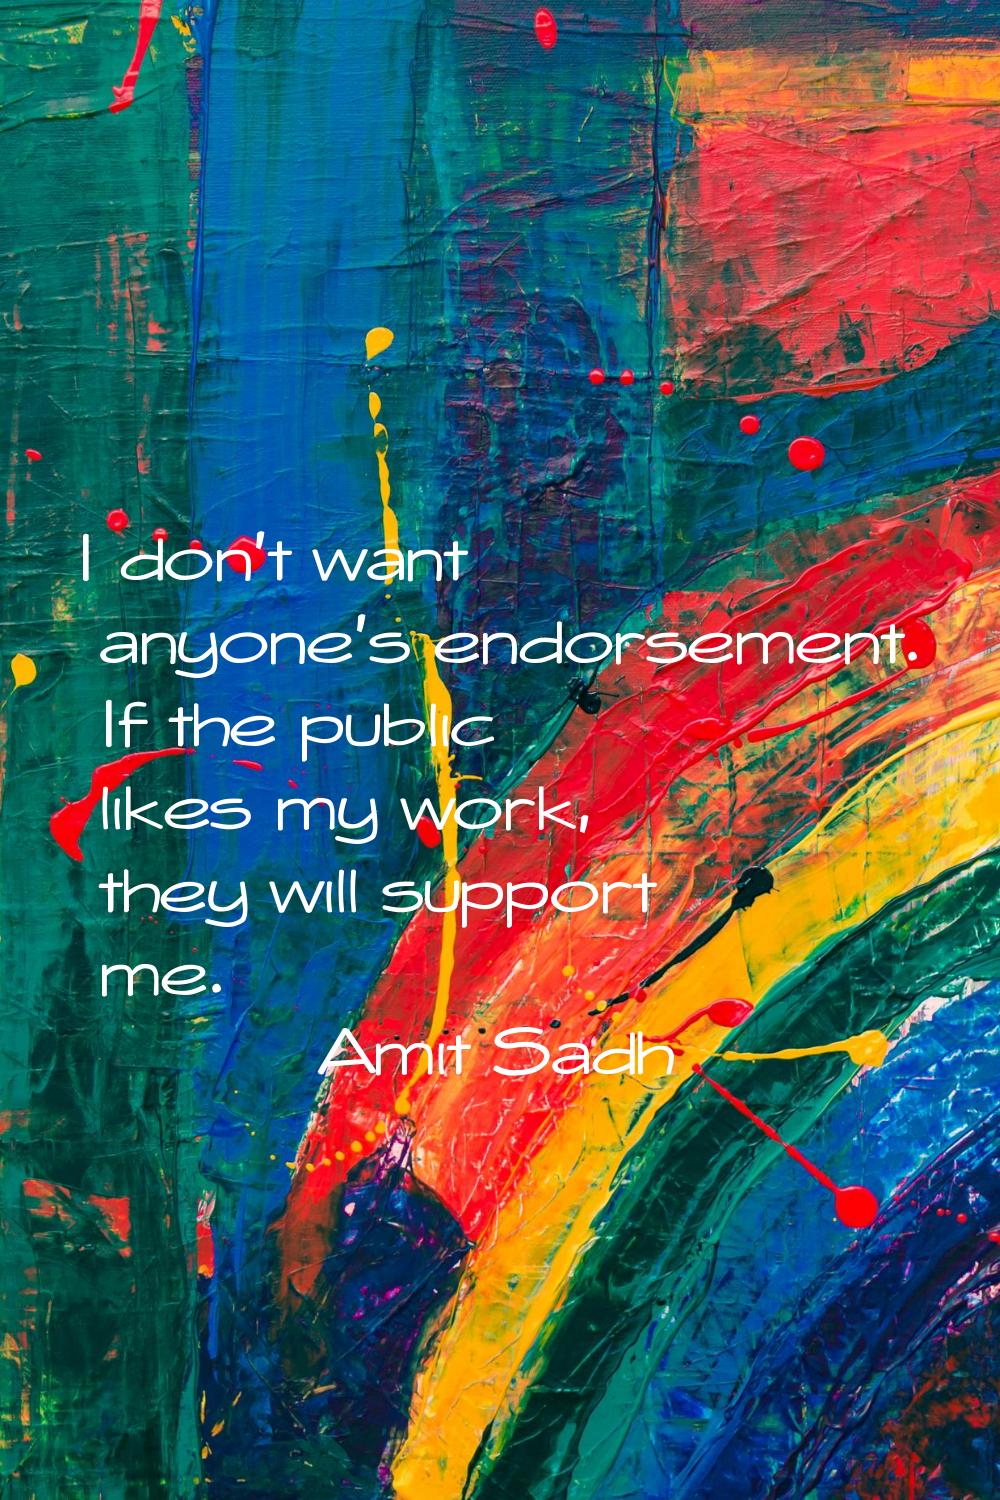 I don't want anyone's endorsement. If the public likes my work, they will support me.